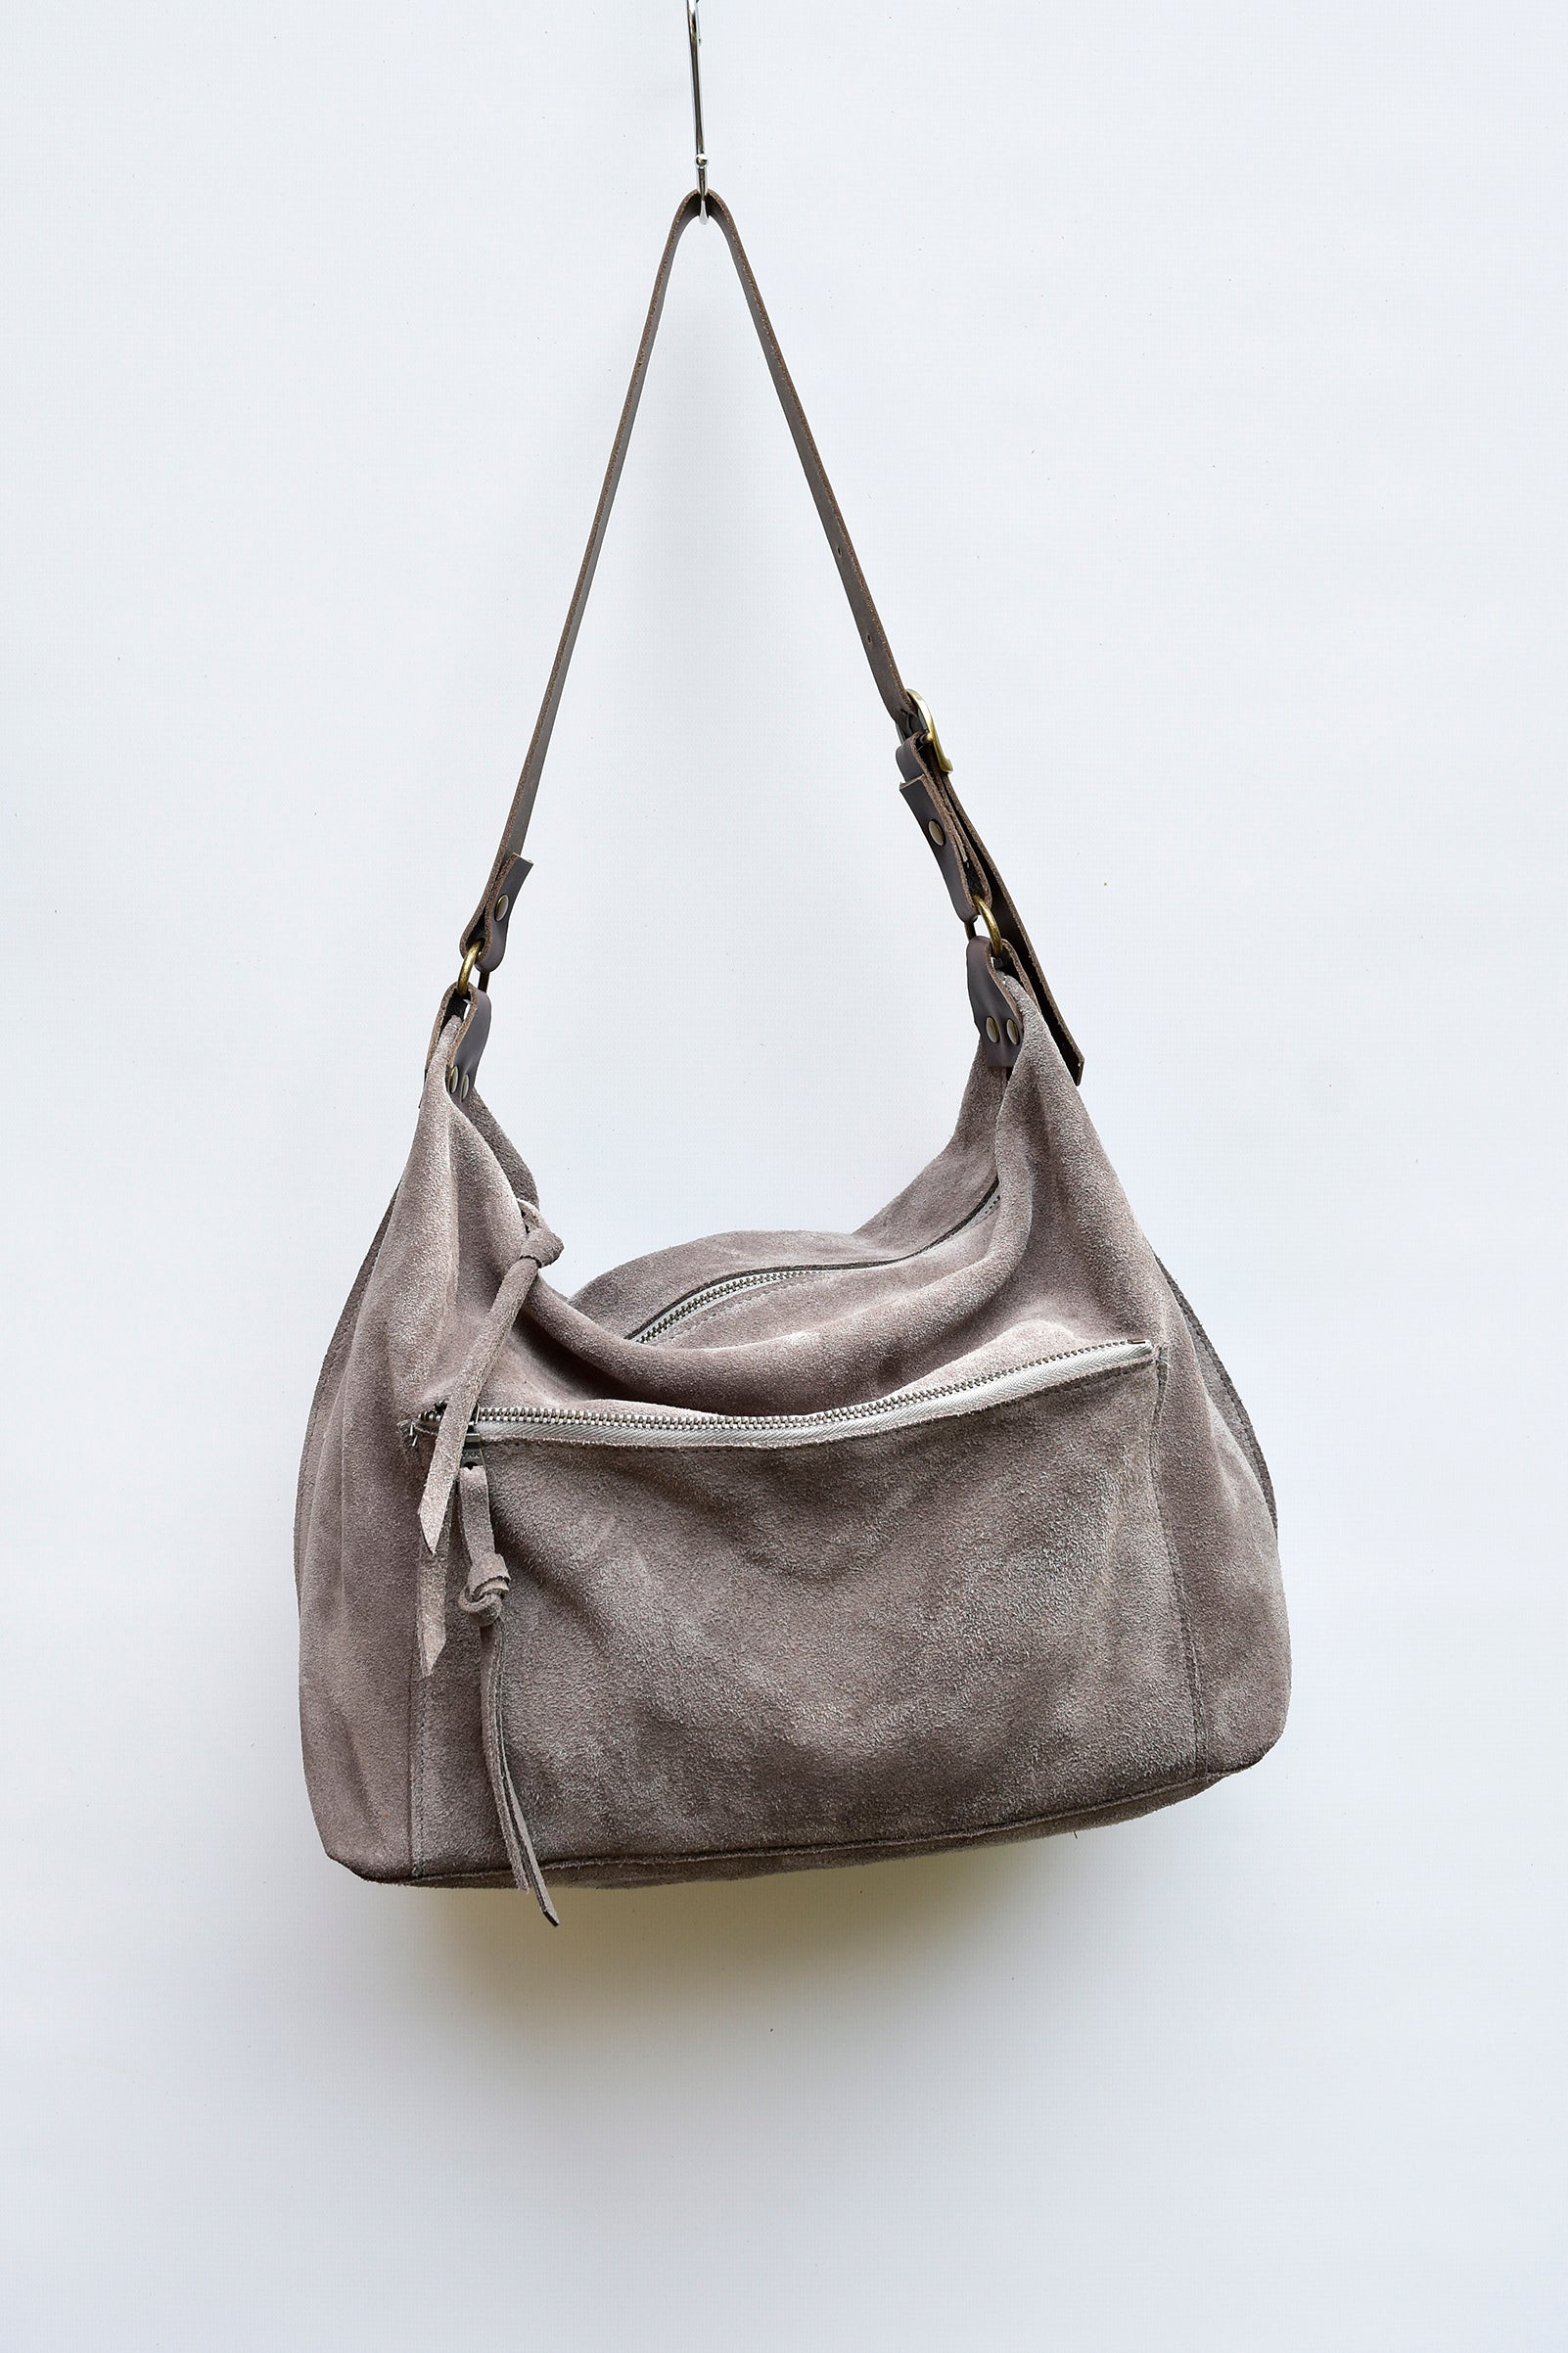 Latico leather purse, Margie tote – Belle Starr